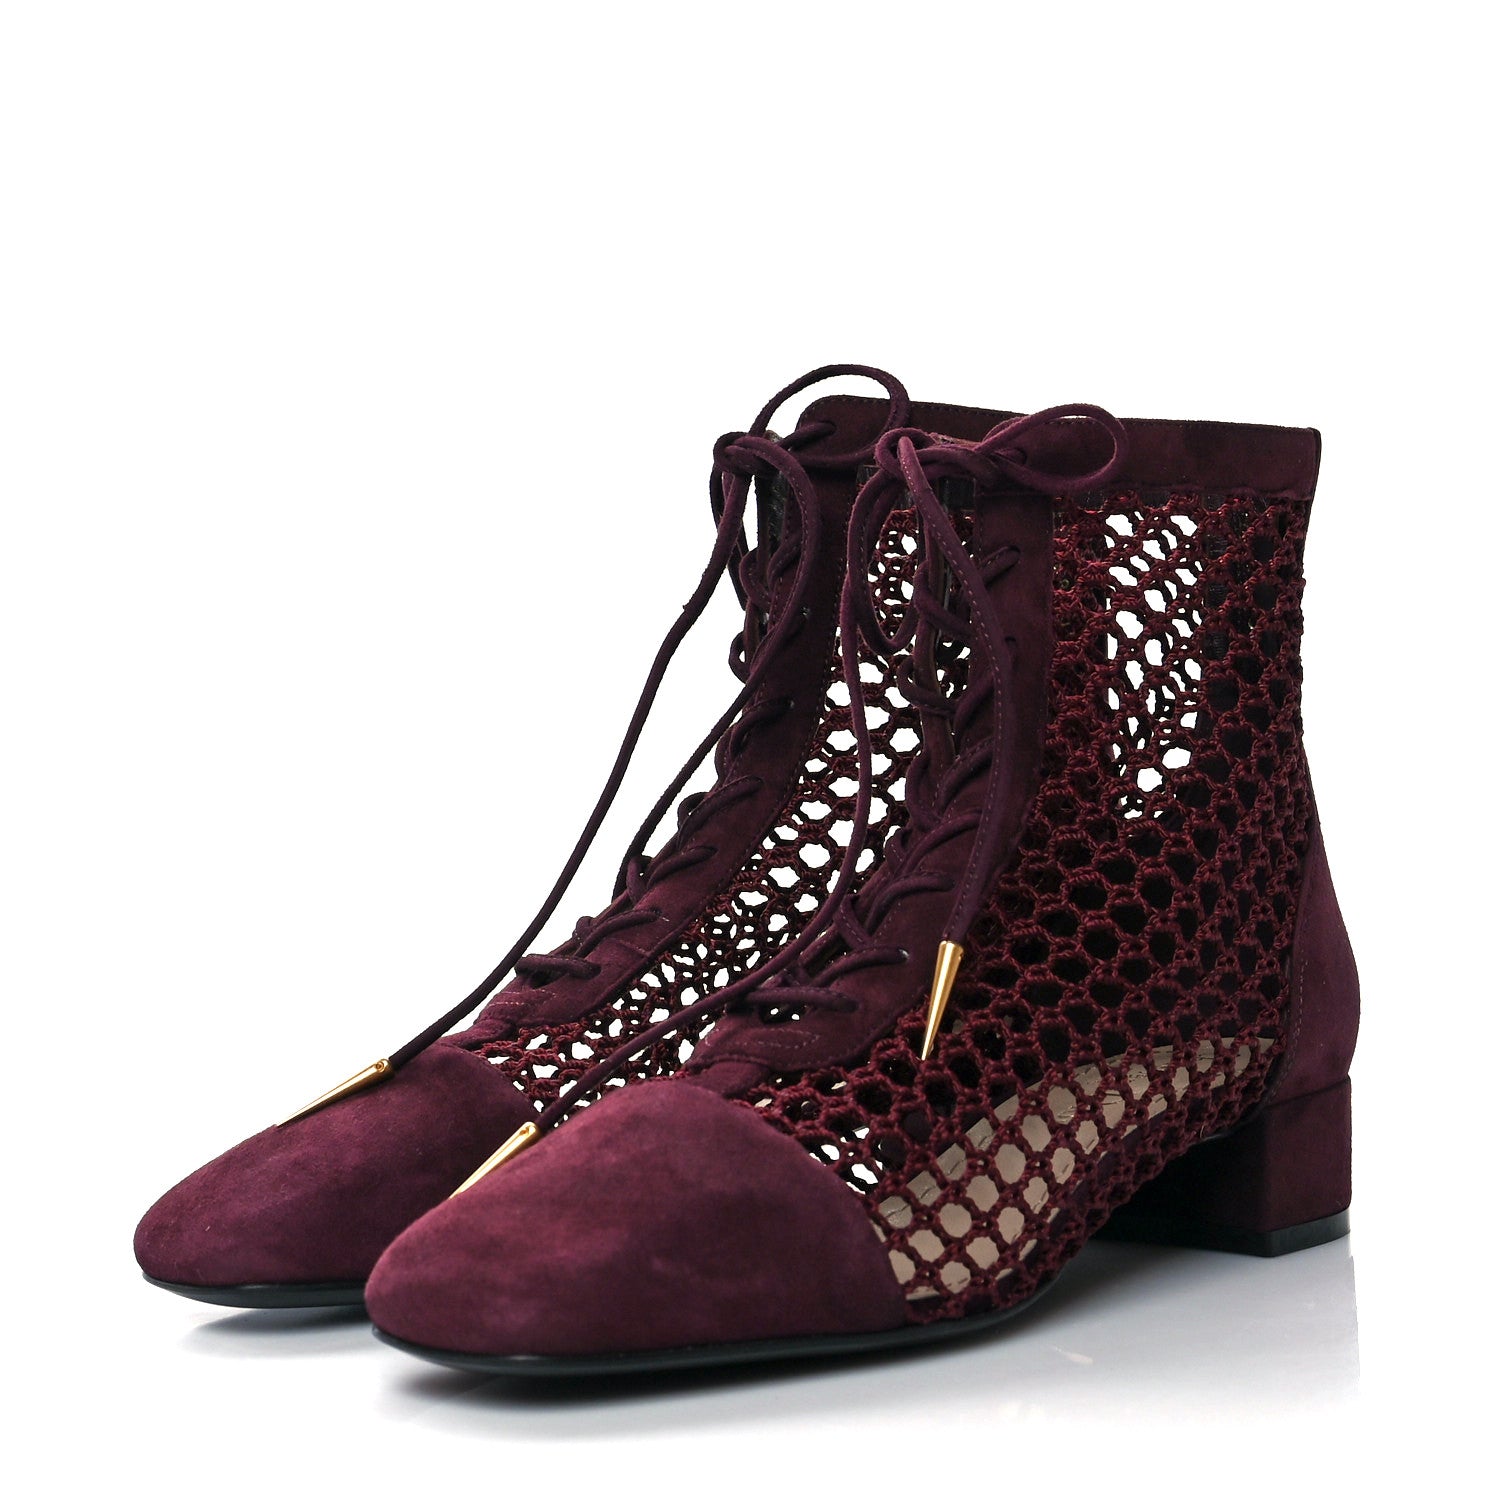 Naughtily-d lace up boots Dior Burgundy size 38 EU in Suede - 26401541